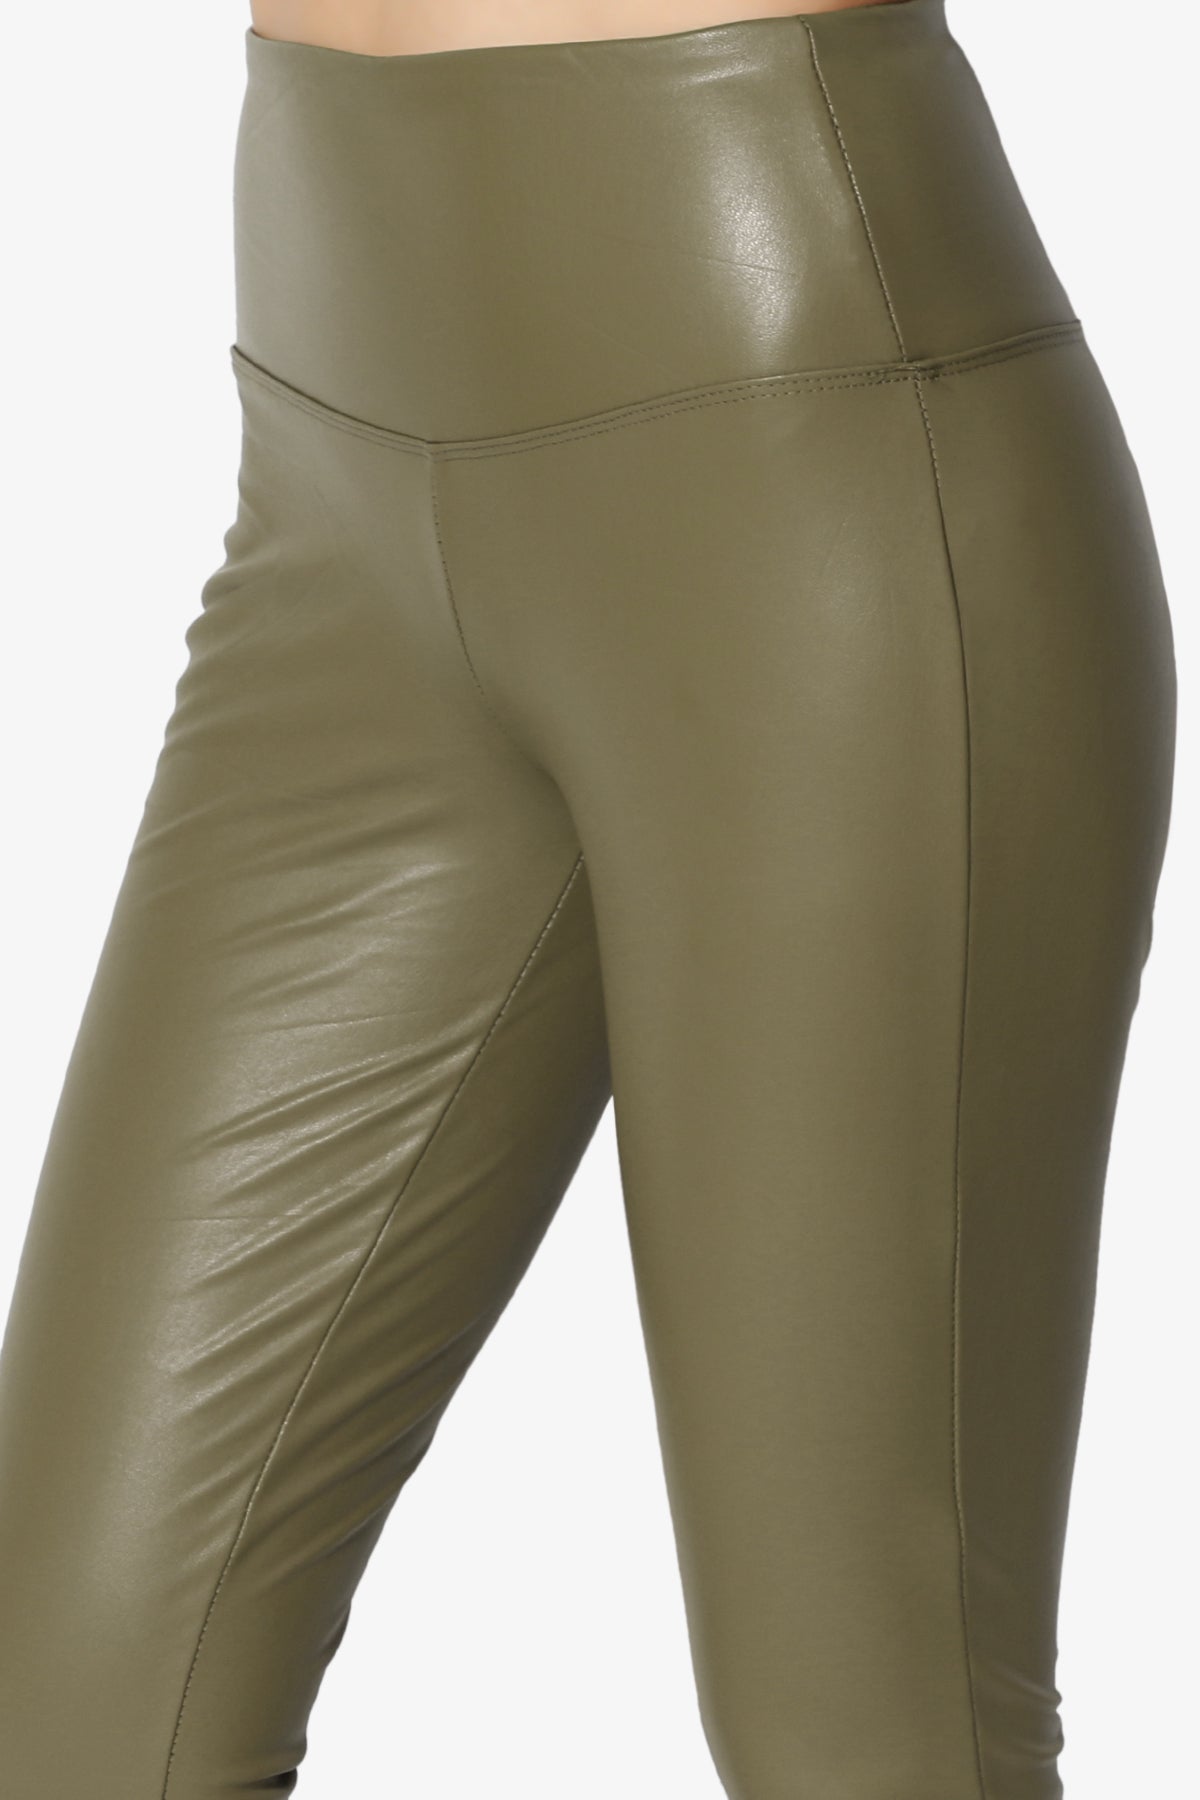 Load image into Gallery viewer, Mayari High Rise Faux Leather Leggings OLIVE KHAKI_5
